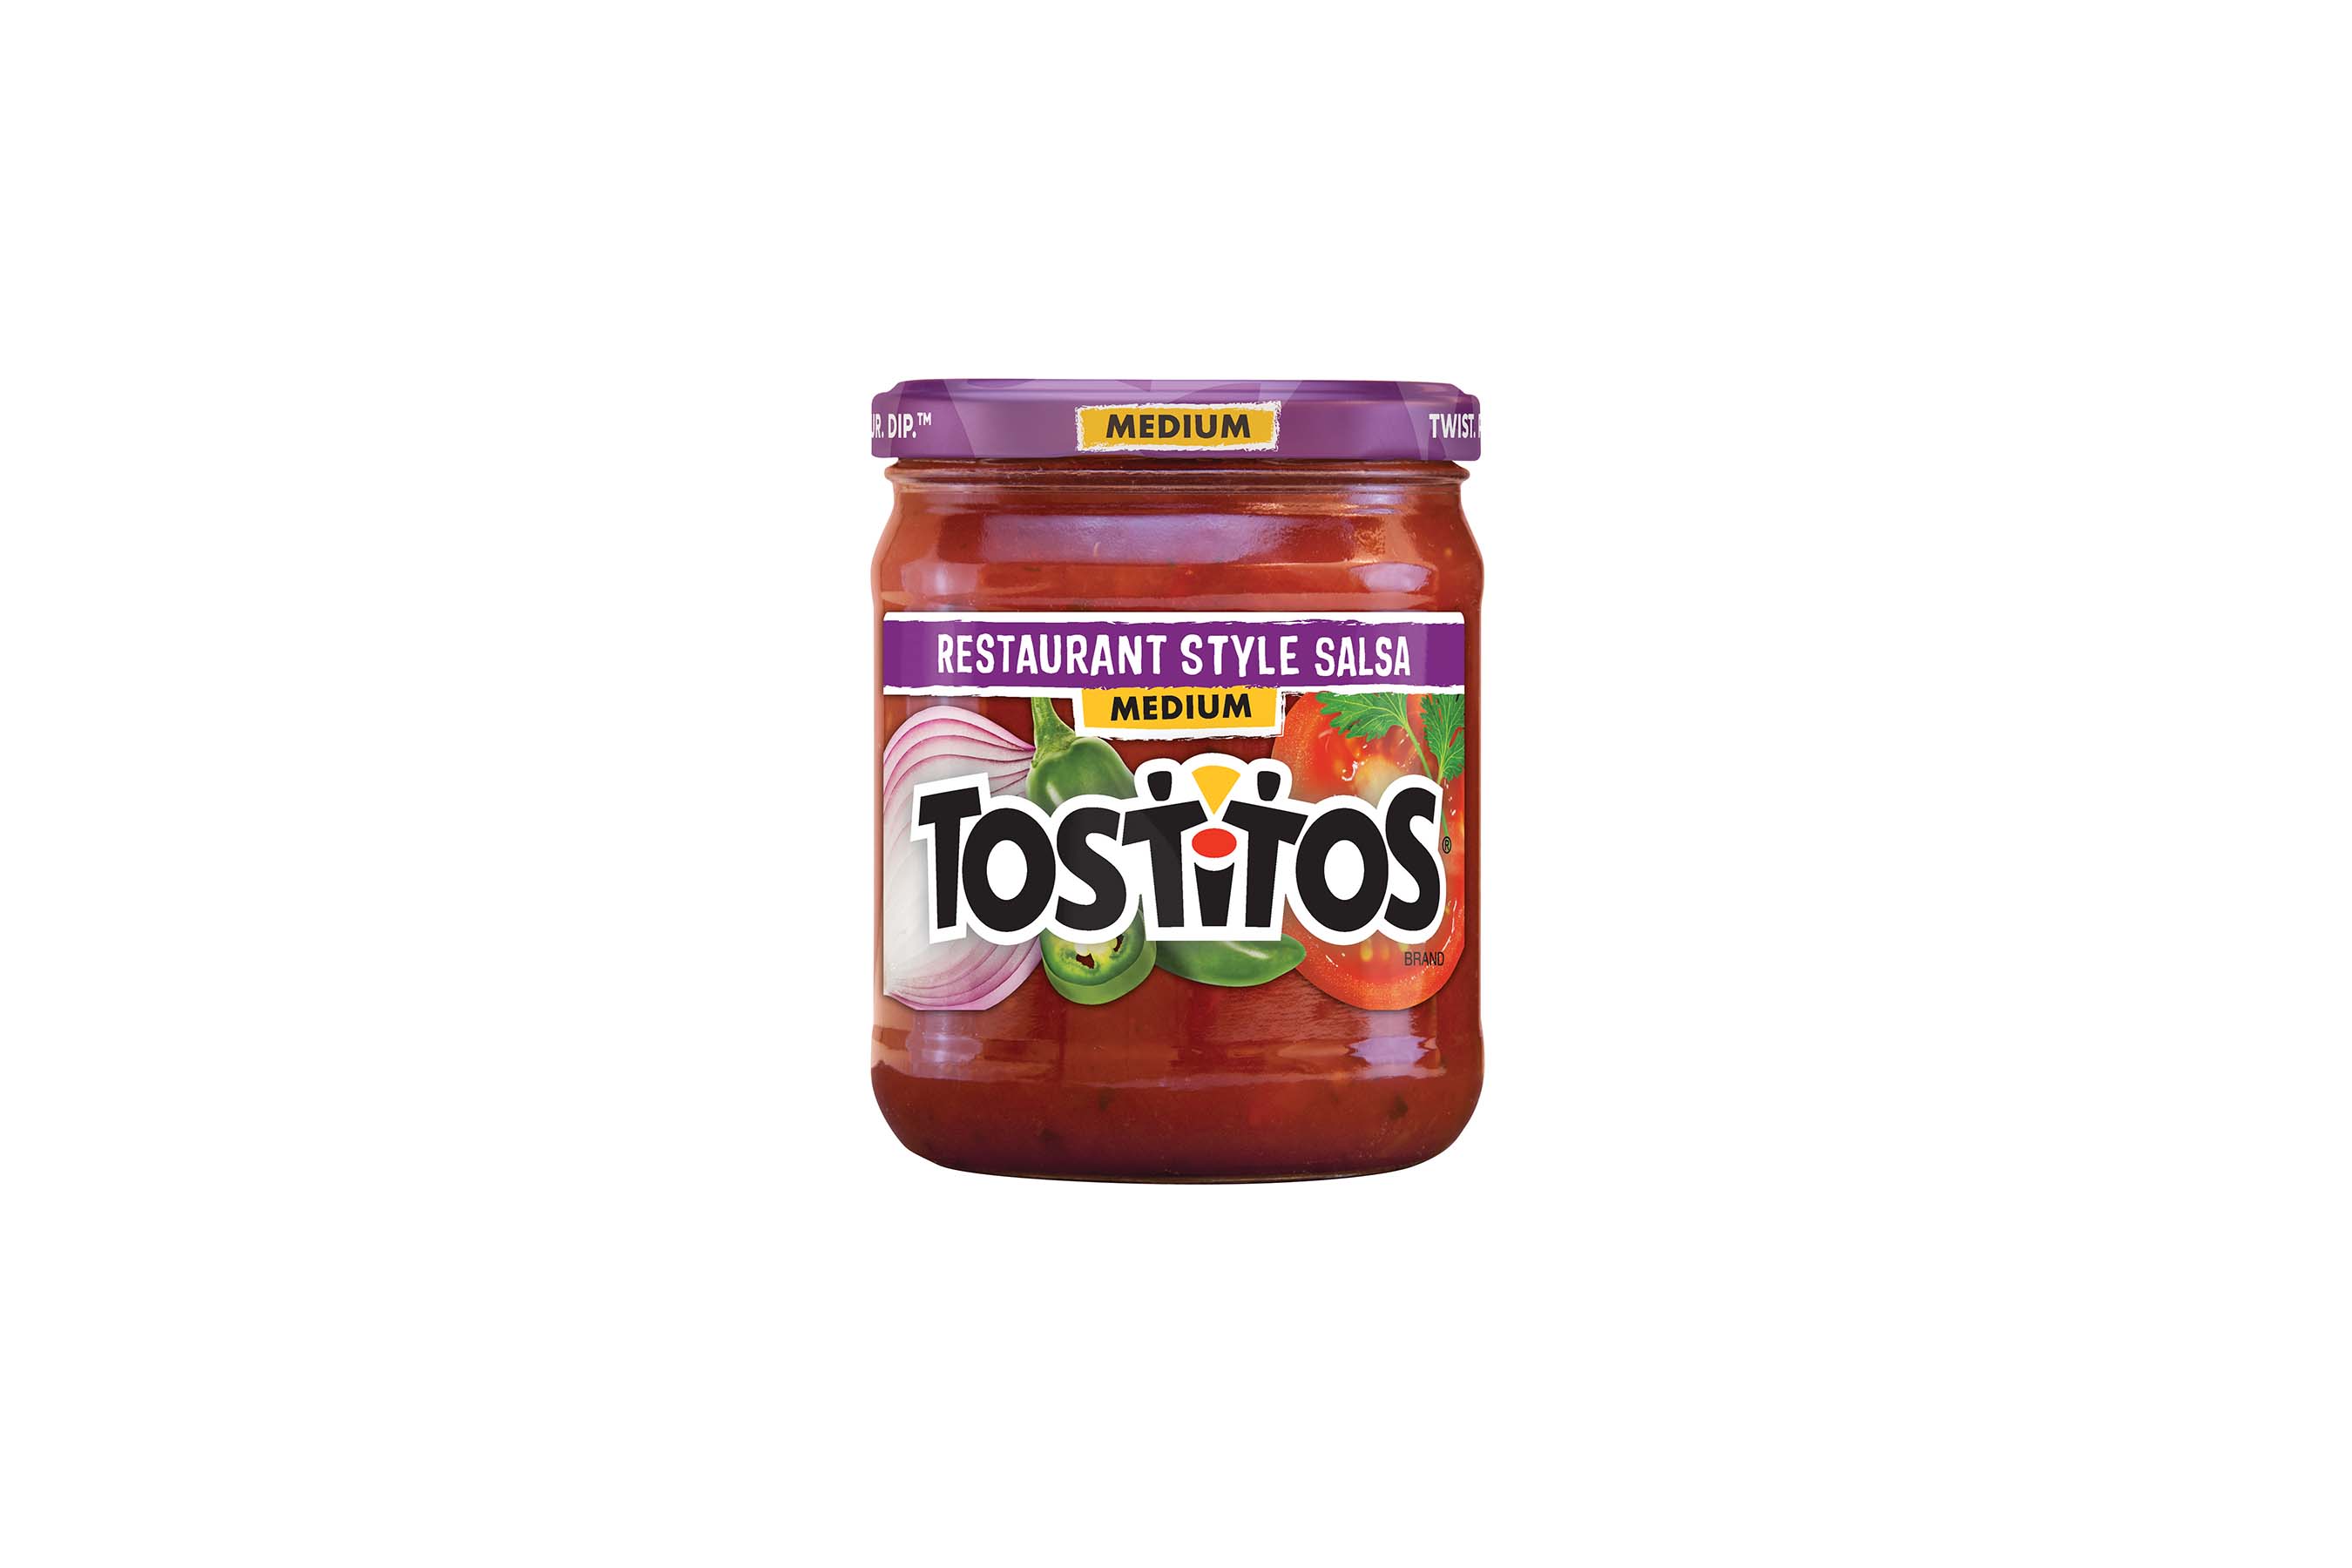 Made with tomatoes, onions, jalapeños and cilantro, Tostitos Restaurant Style Salsa is the perfect medium heat, smooth salsa to pair with Tostitos Cantina Thin & Crispy tortilla chips.